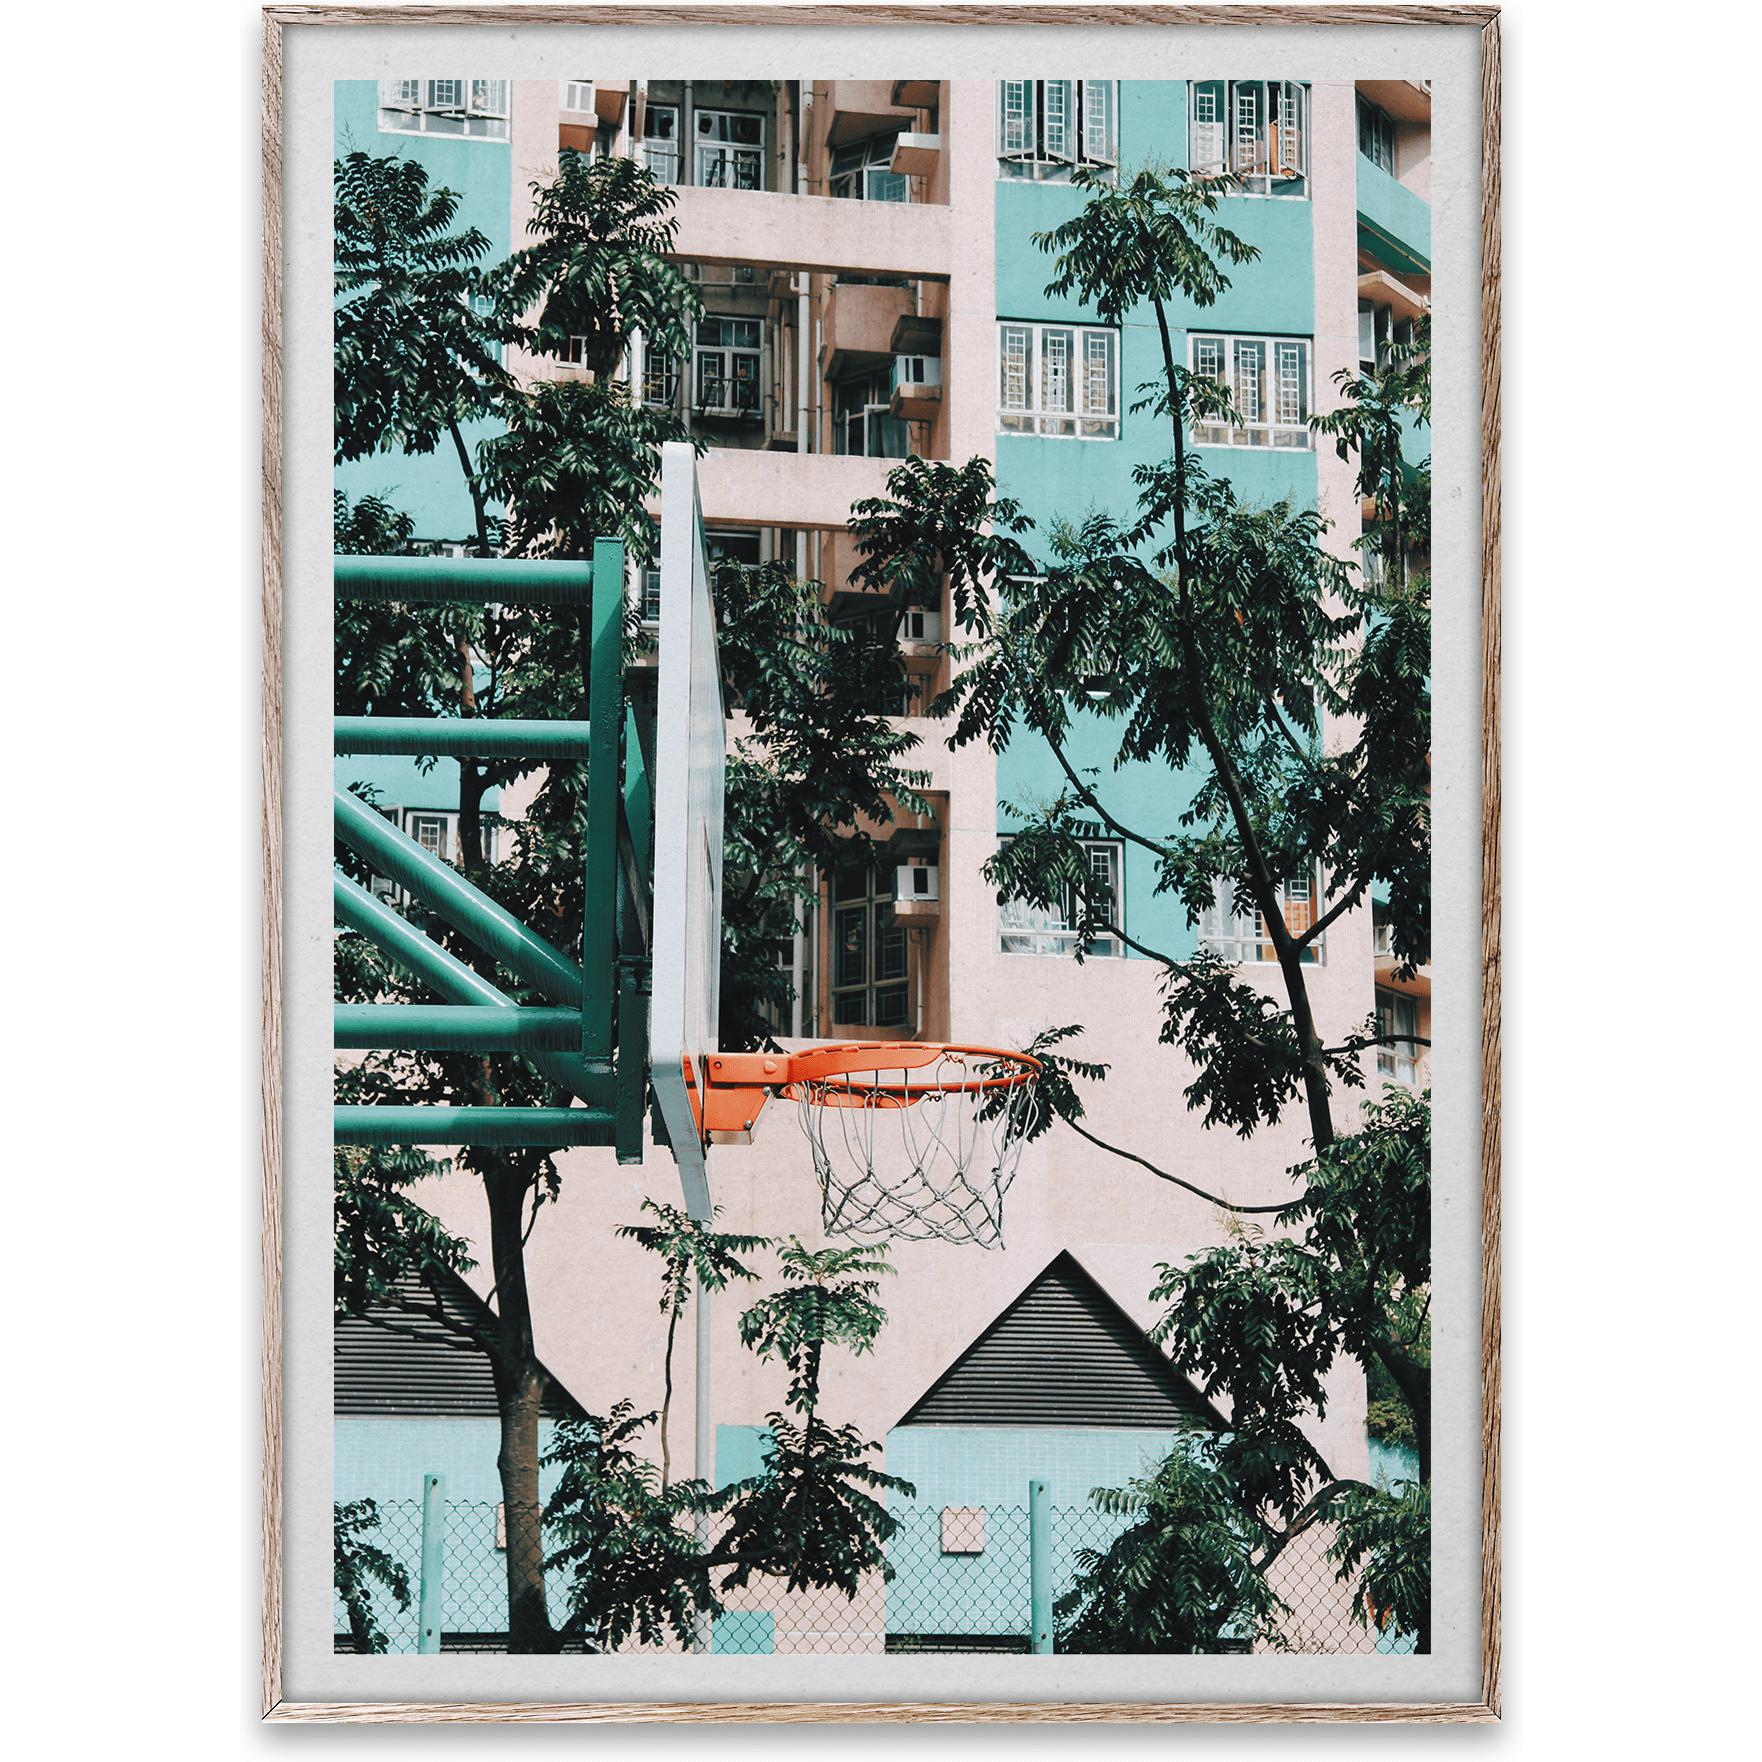 Paper Collective Cities of Basketball 01, Hong Kong Affiche, 50x70 cm